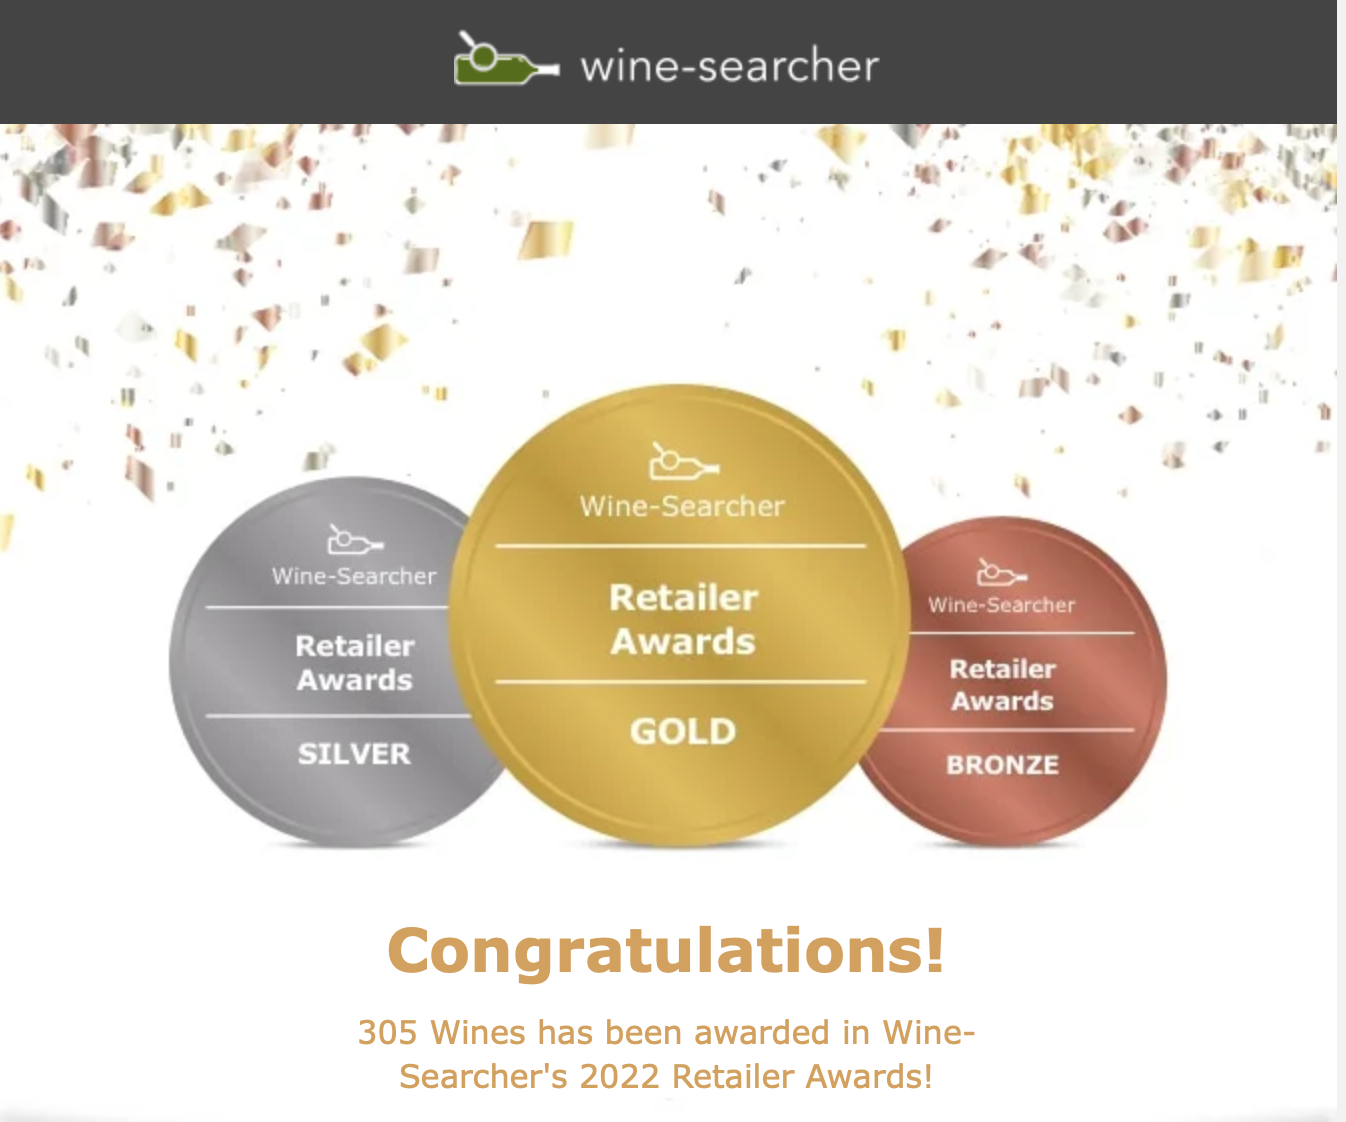 305 Wines awarded in Wine-Searcher’s 2022 Retailer Awards